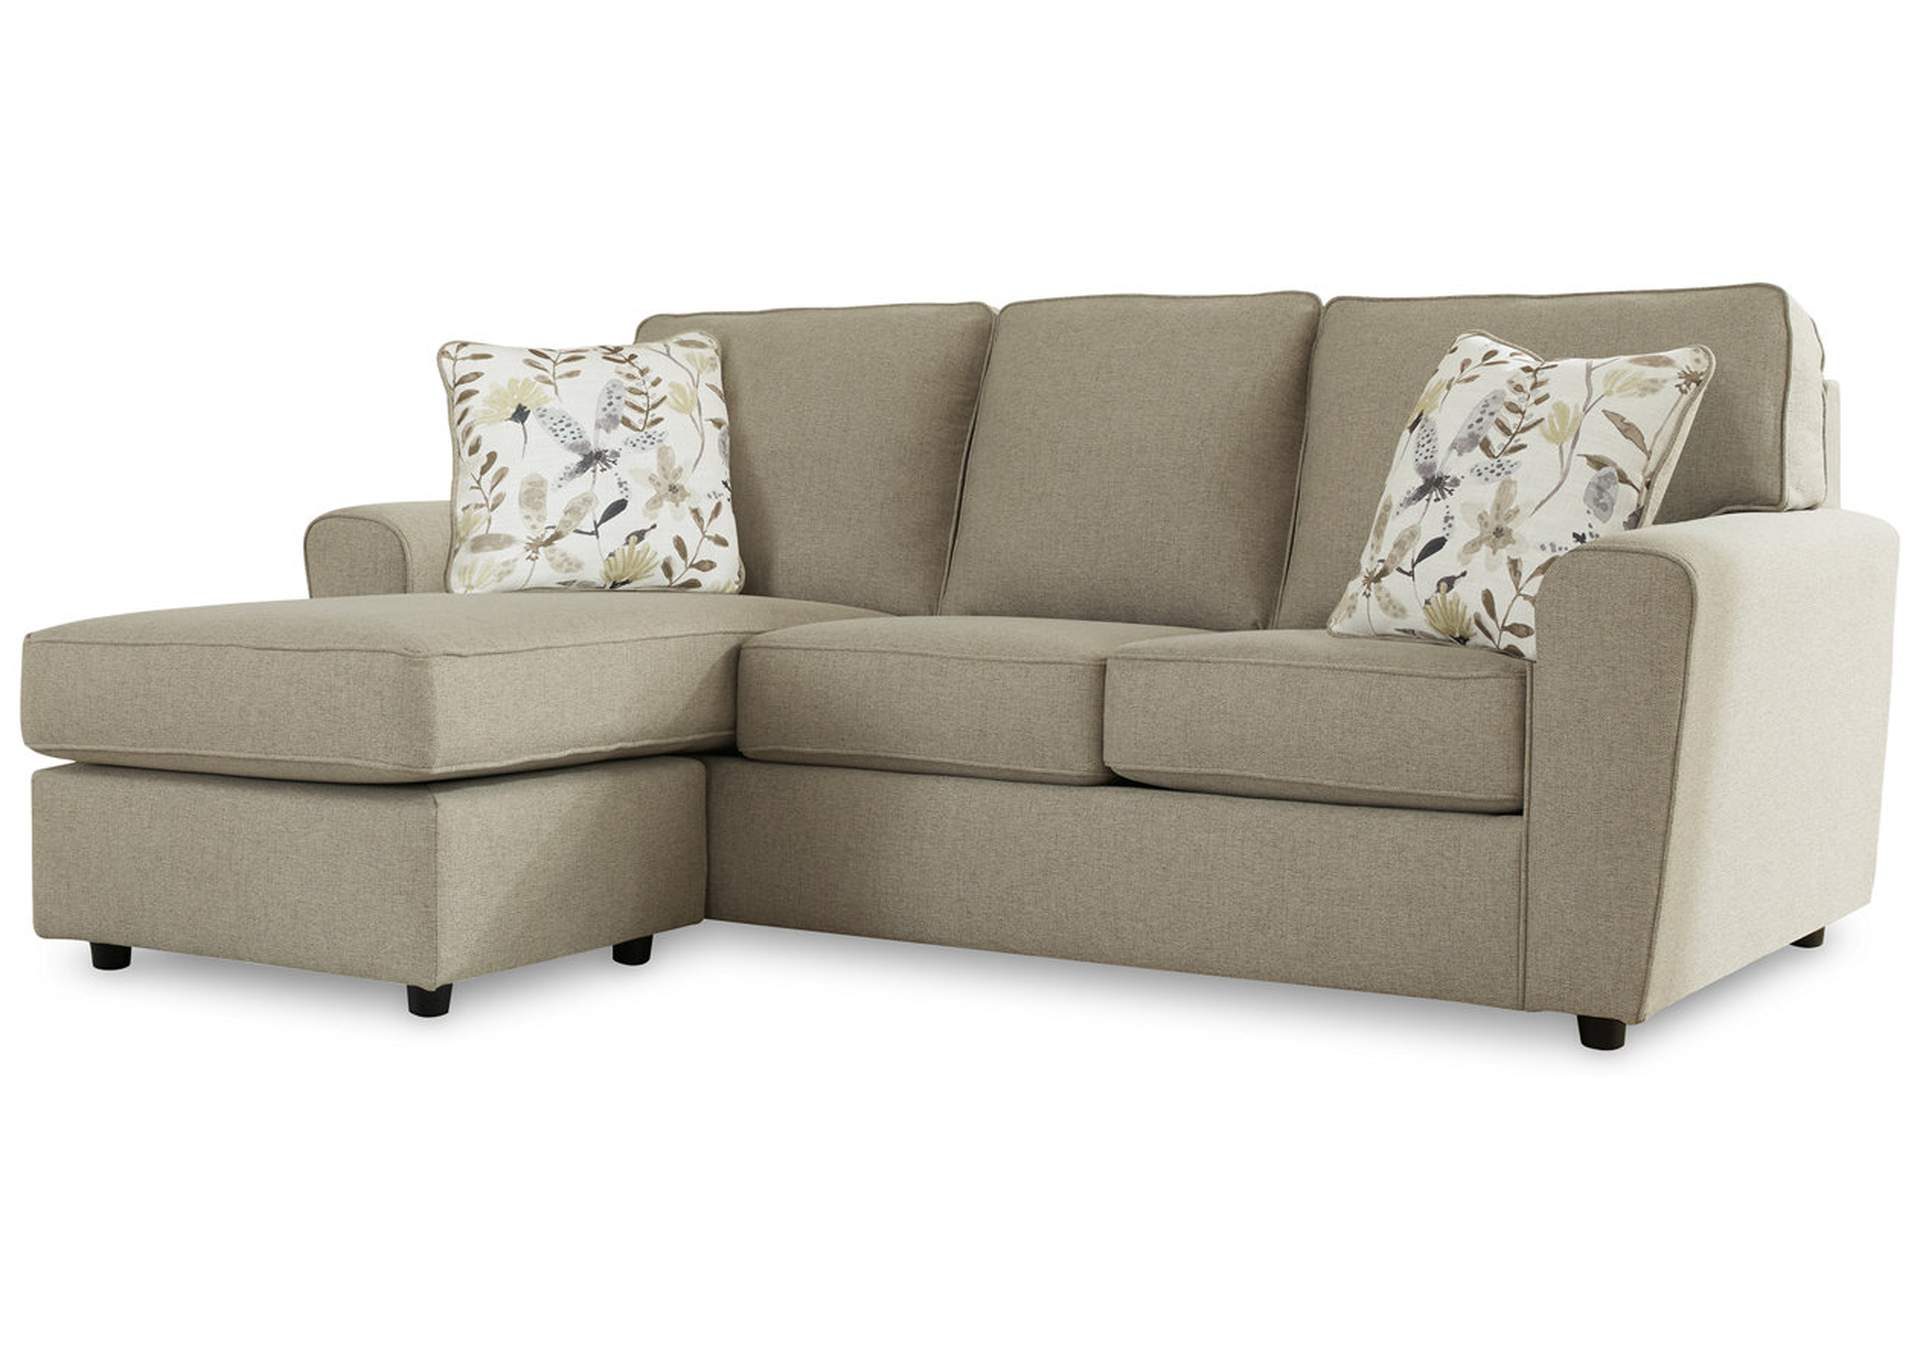 Renshaw Sofa Chaise,Signature Design By Ashley